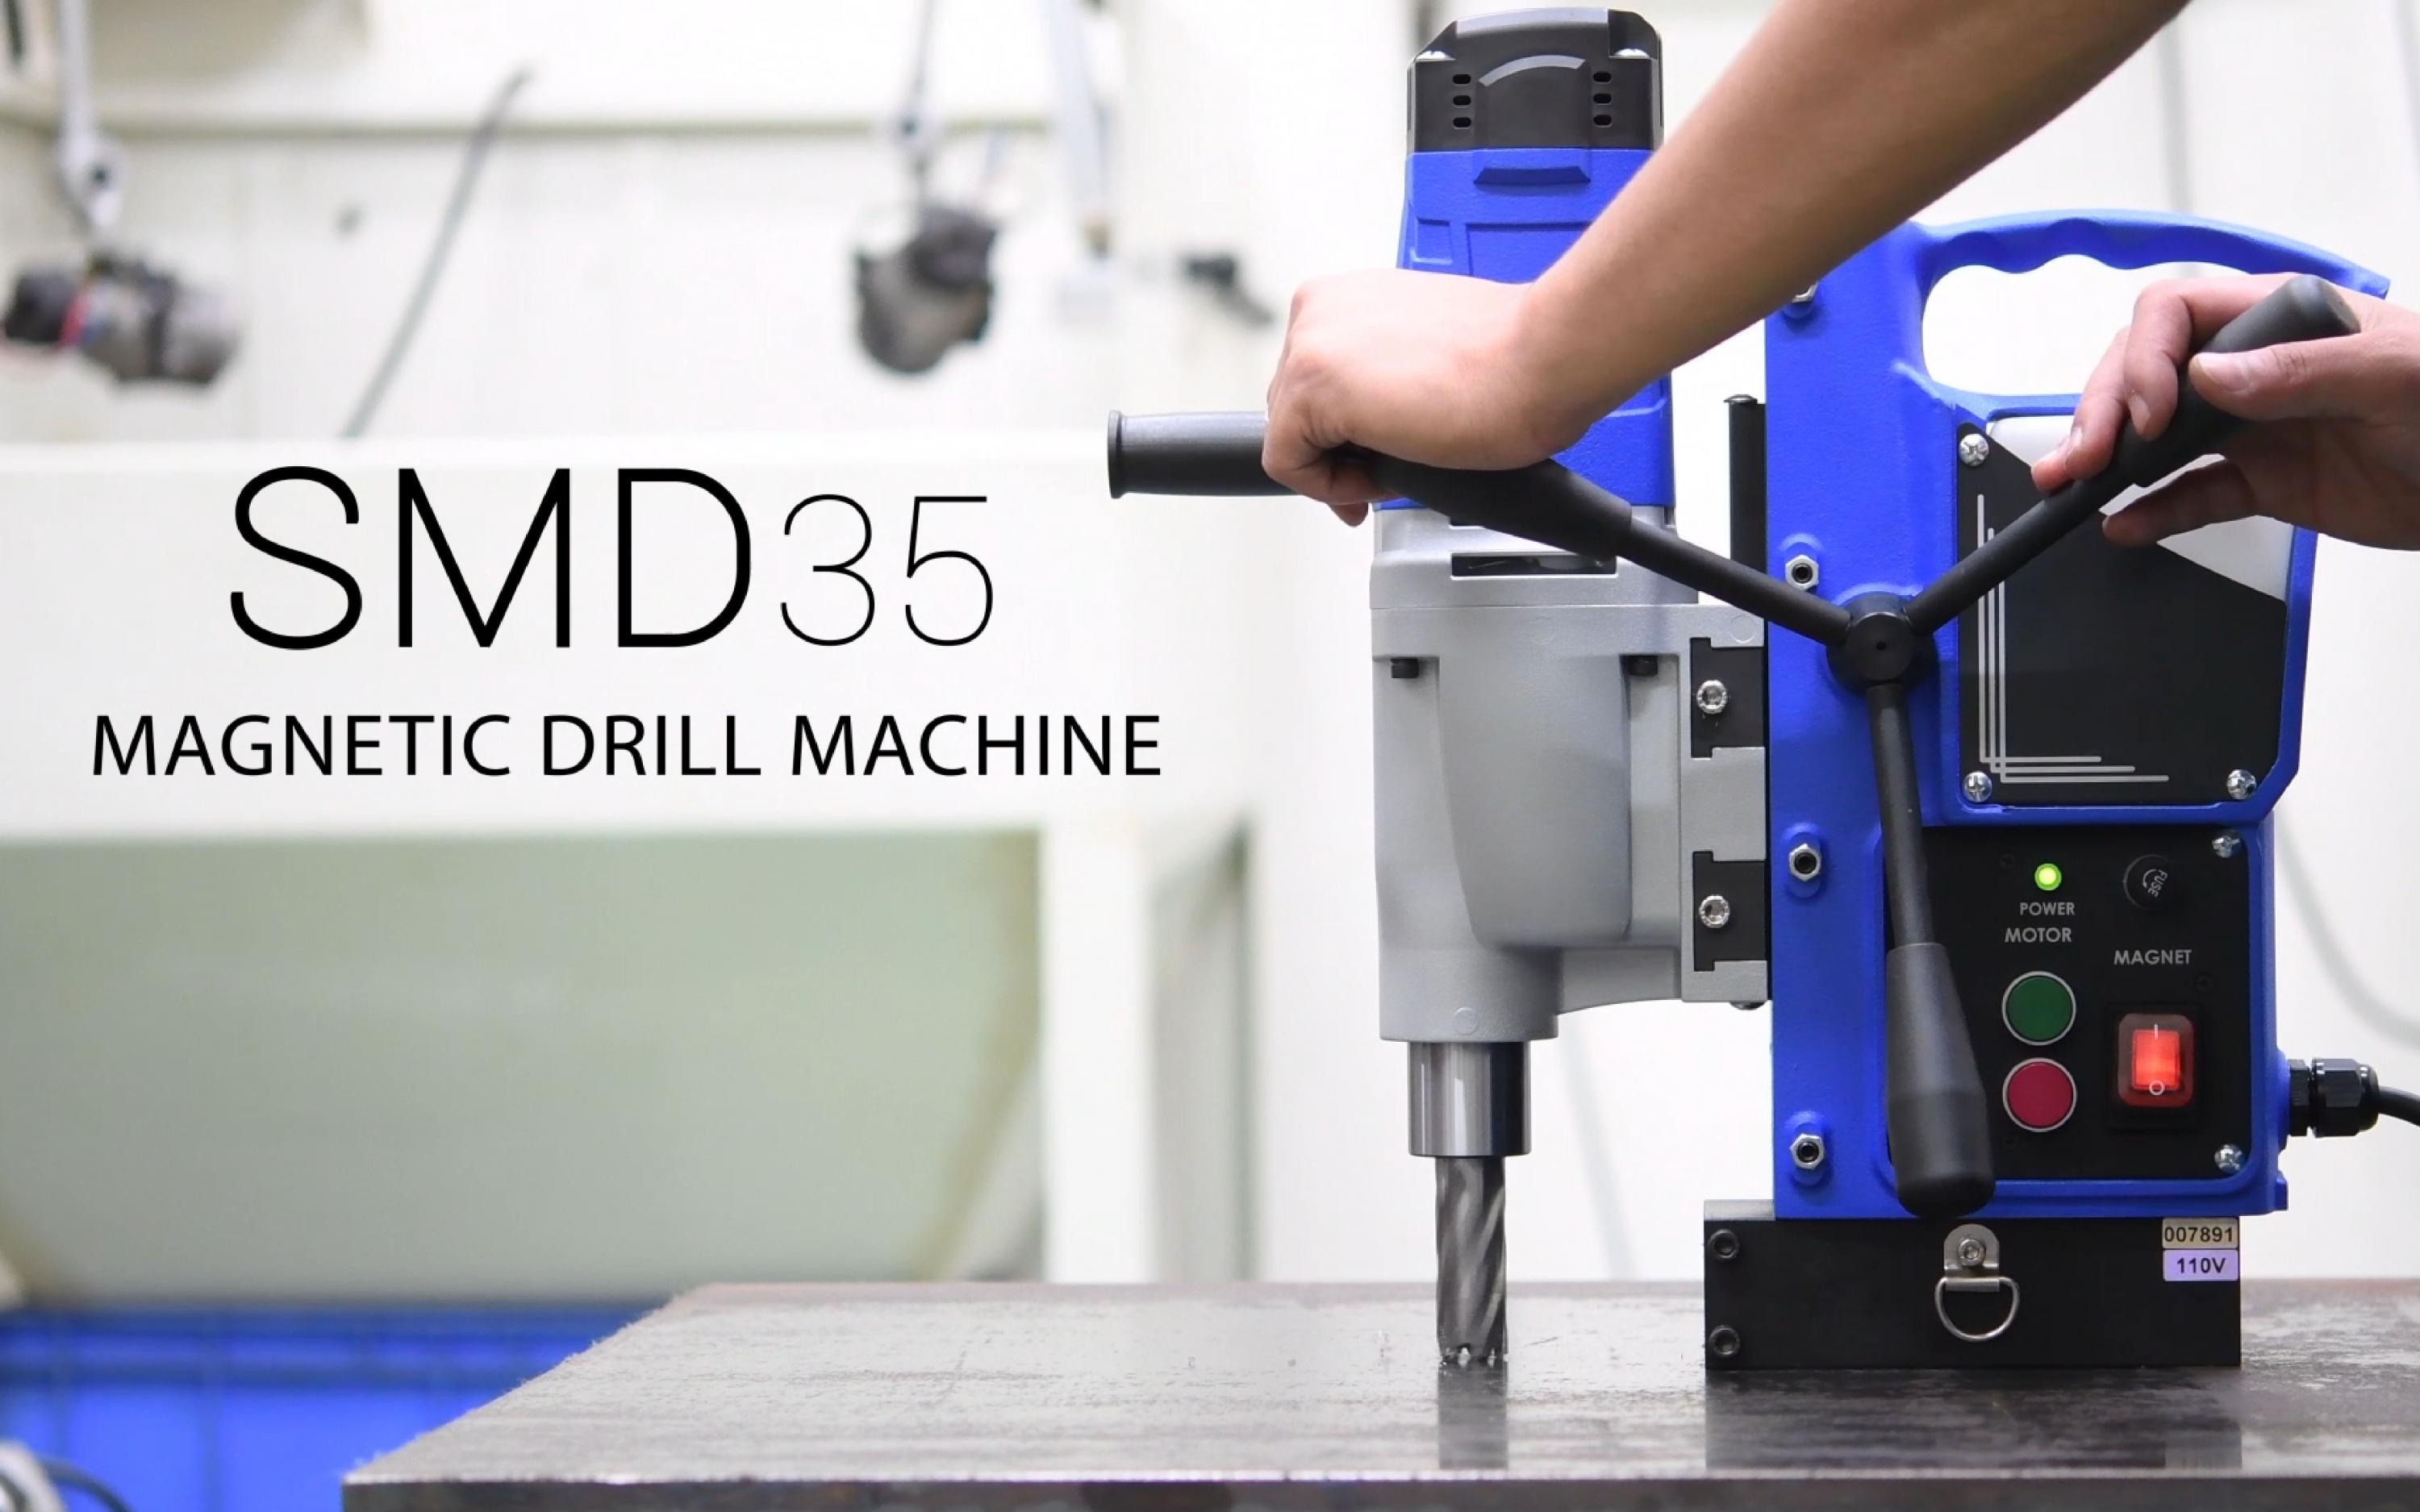 SMD35 Magnetic Drilling Machine